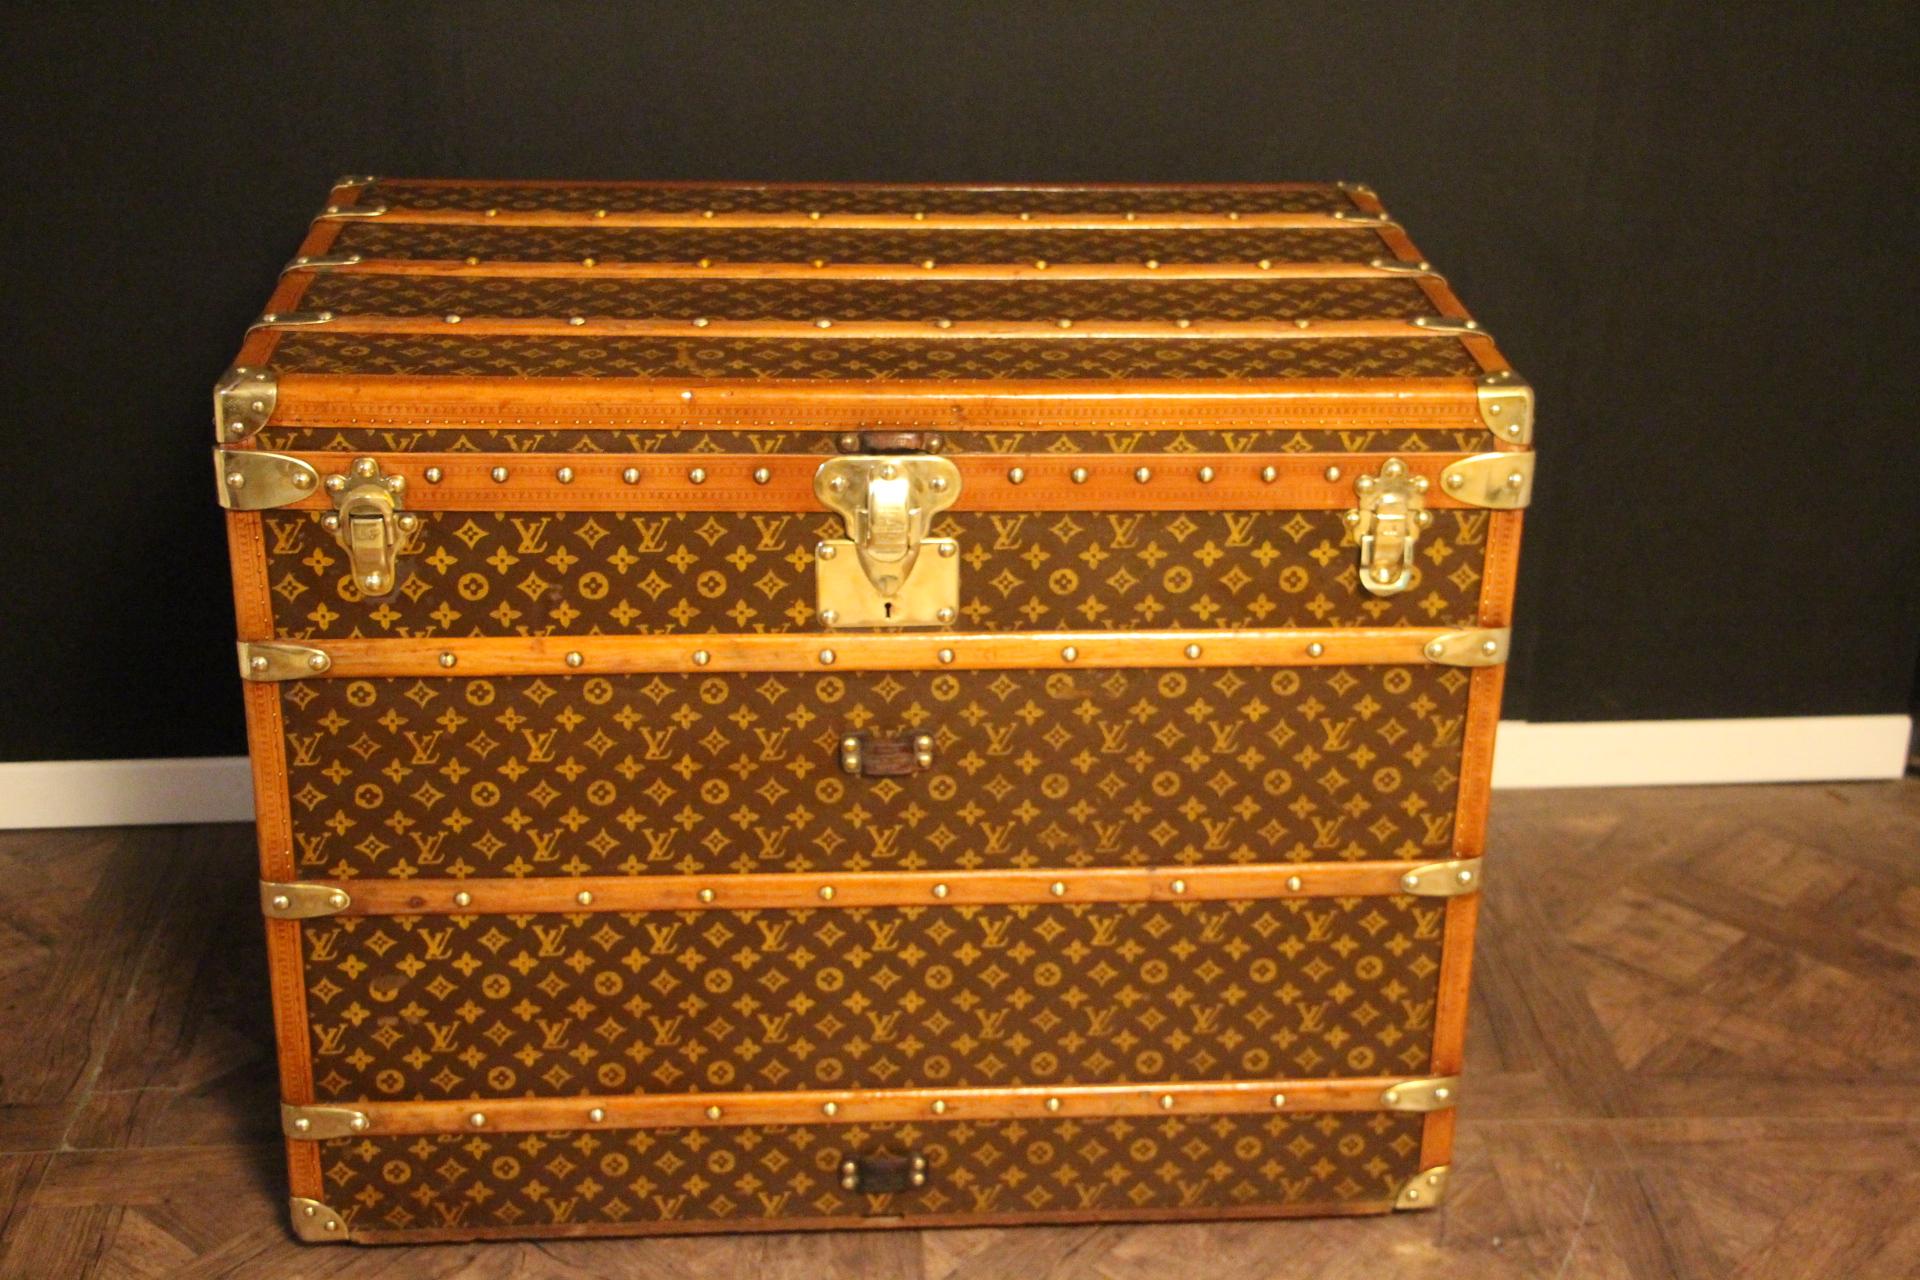 This superb Louis Vuitton steamer trunk features stenciled monogram canvas,honey color lozine trim, LV stamped solid brass locks and studs as well as leather side handles and brass corners. Its customized painted white and blue flag adds a touch of